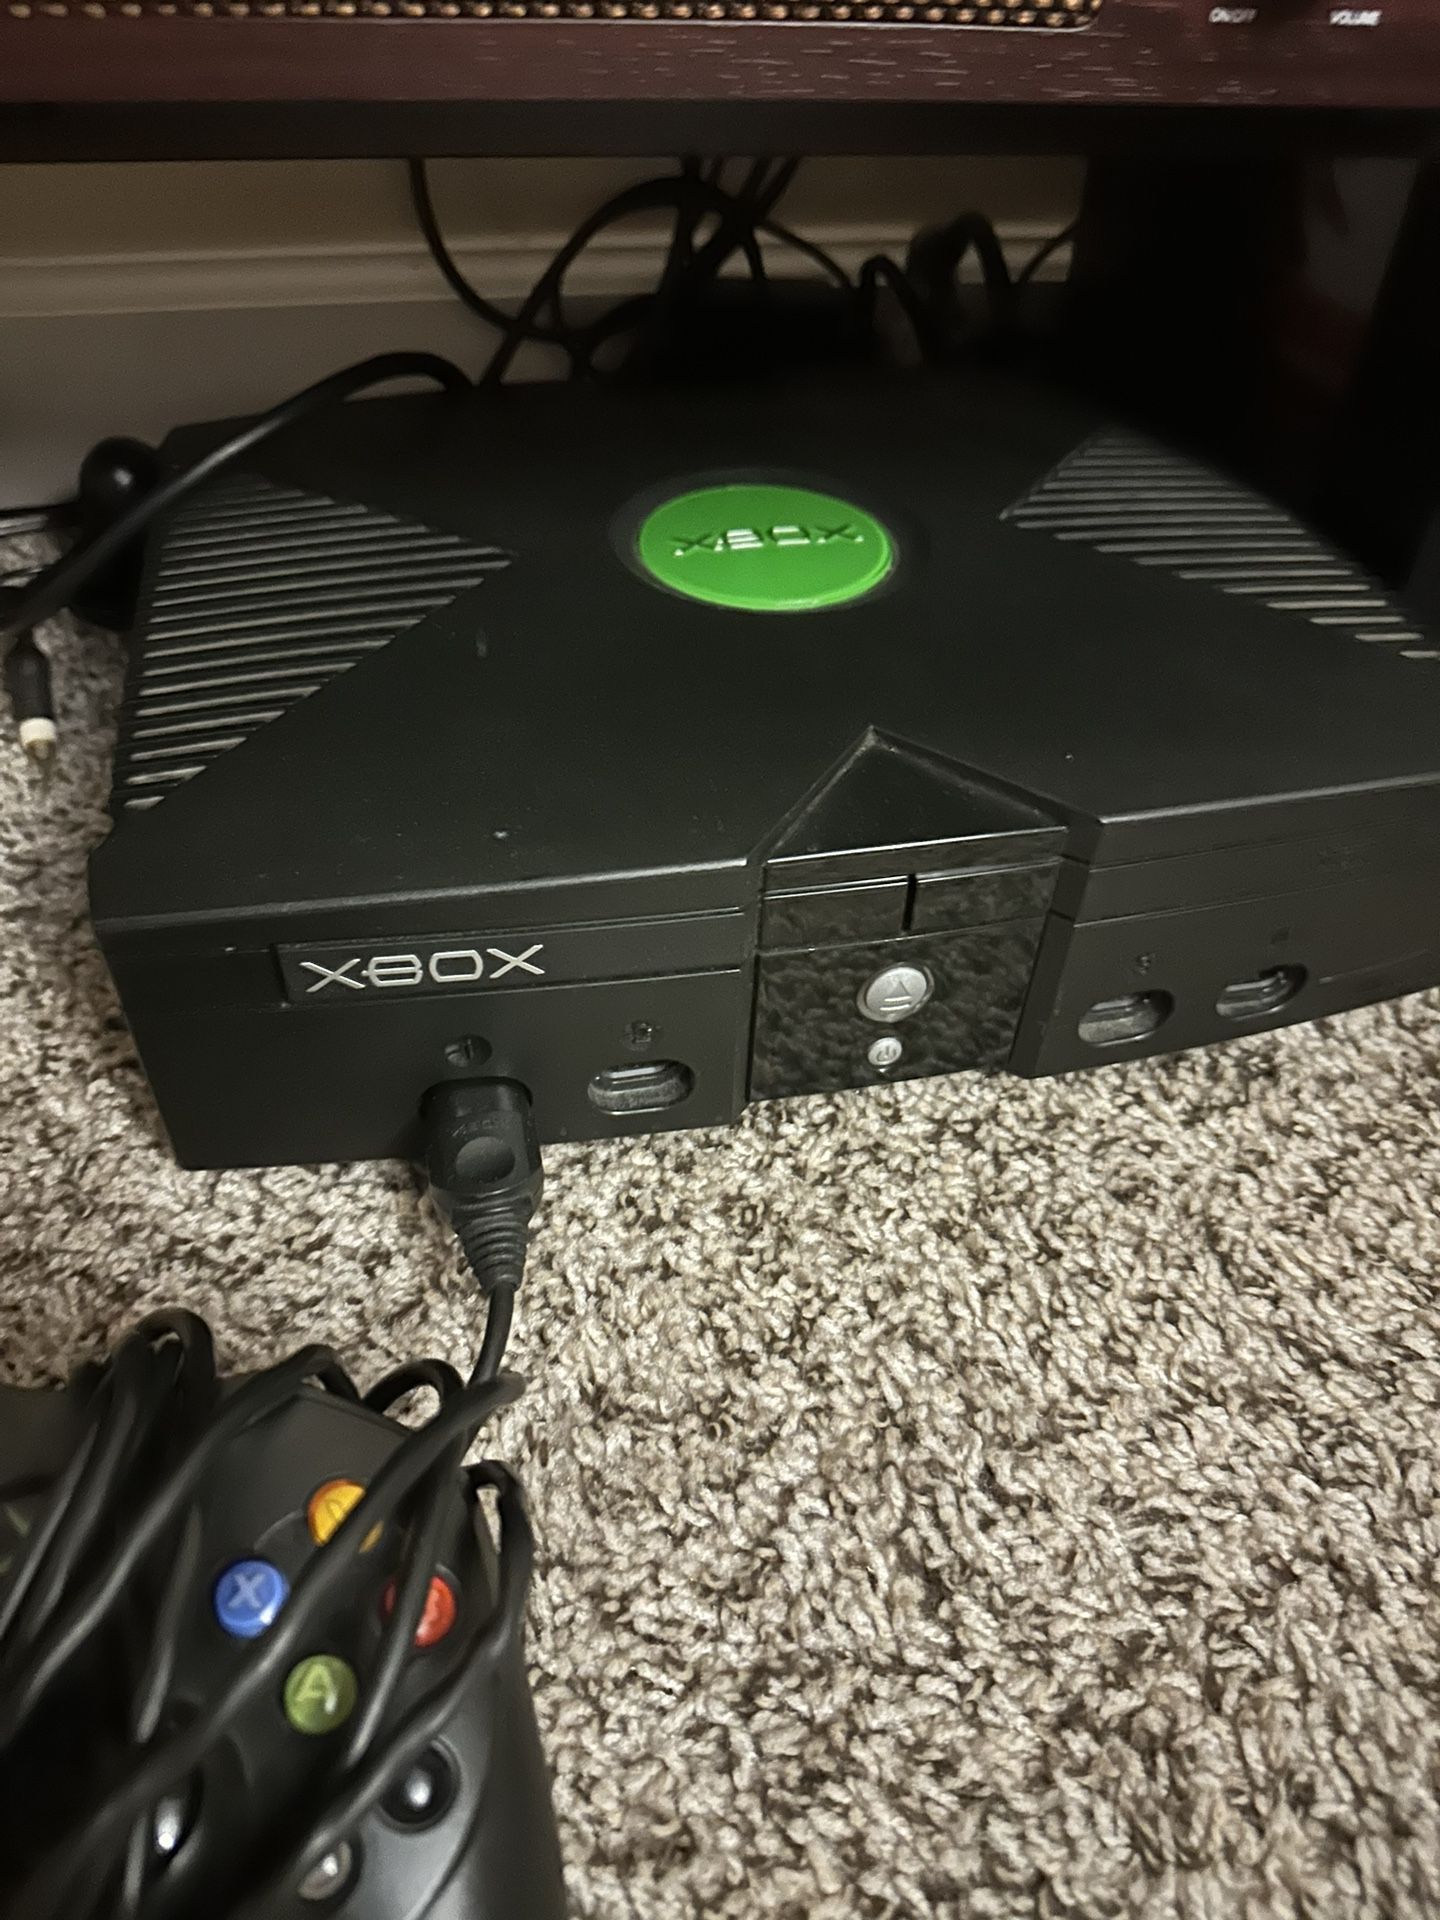 First XBOX console